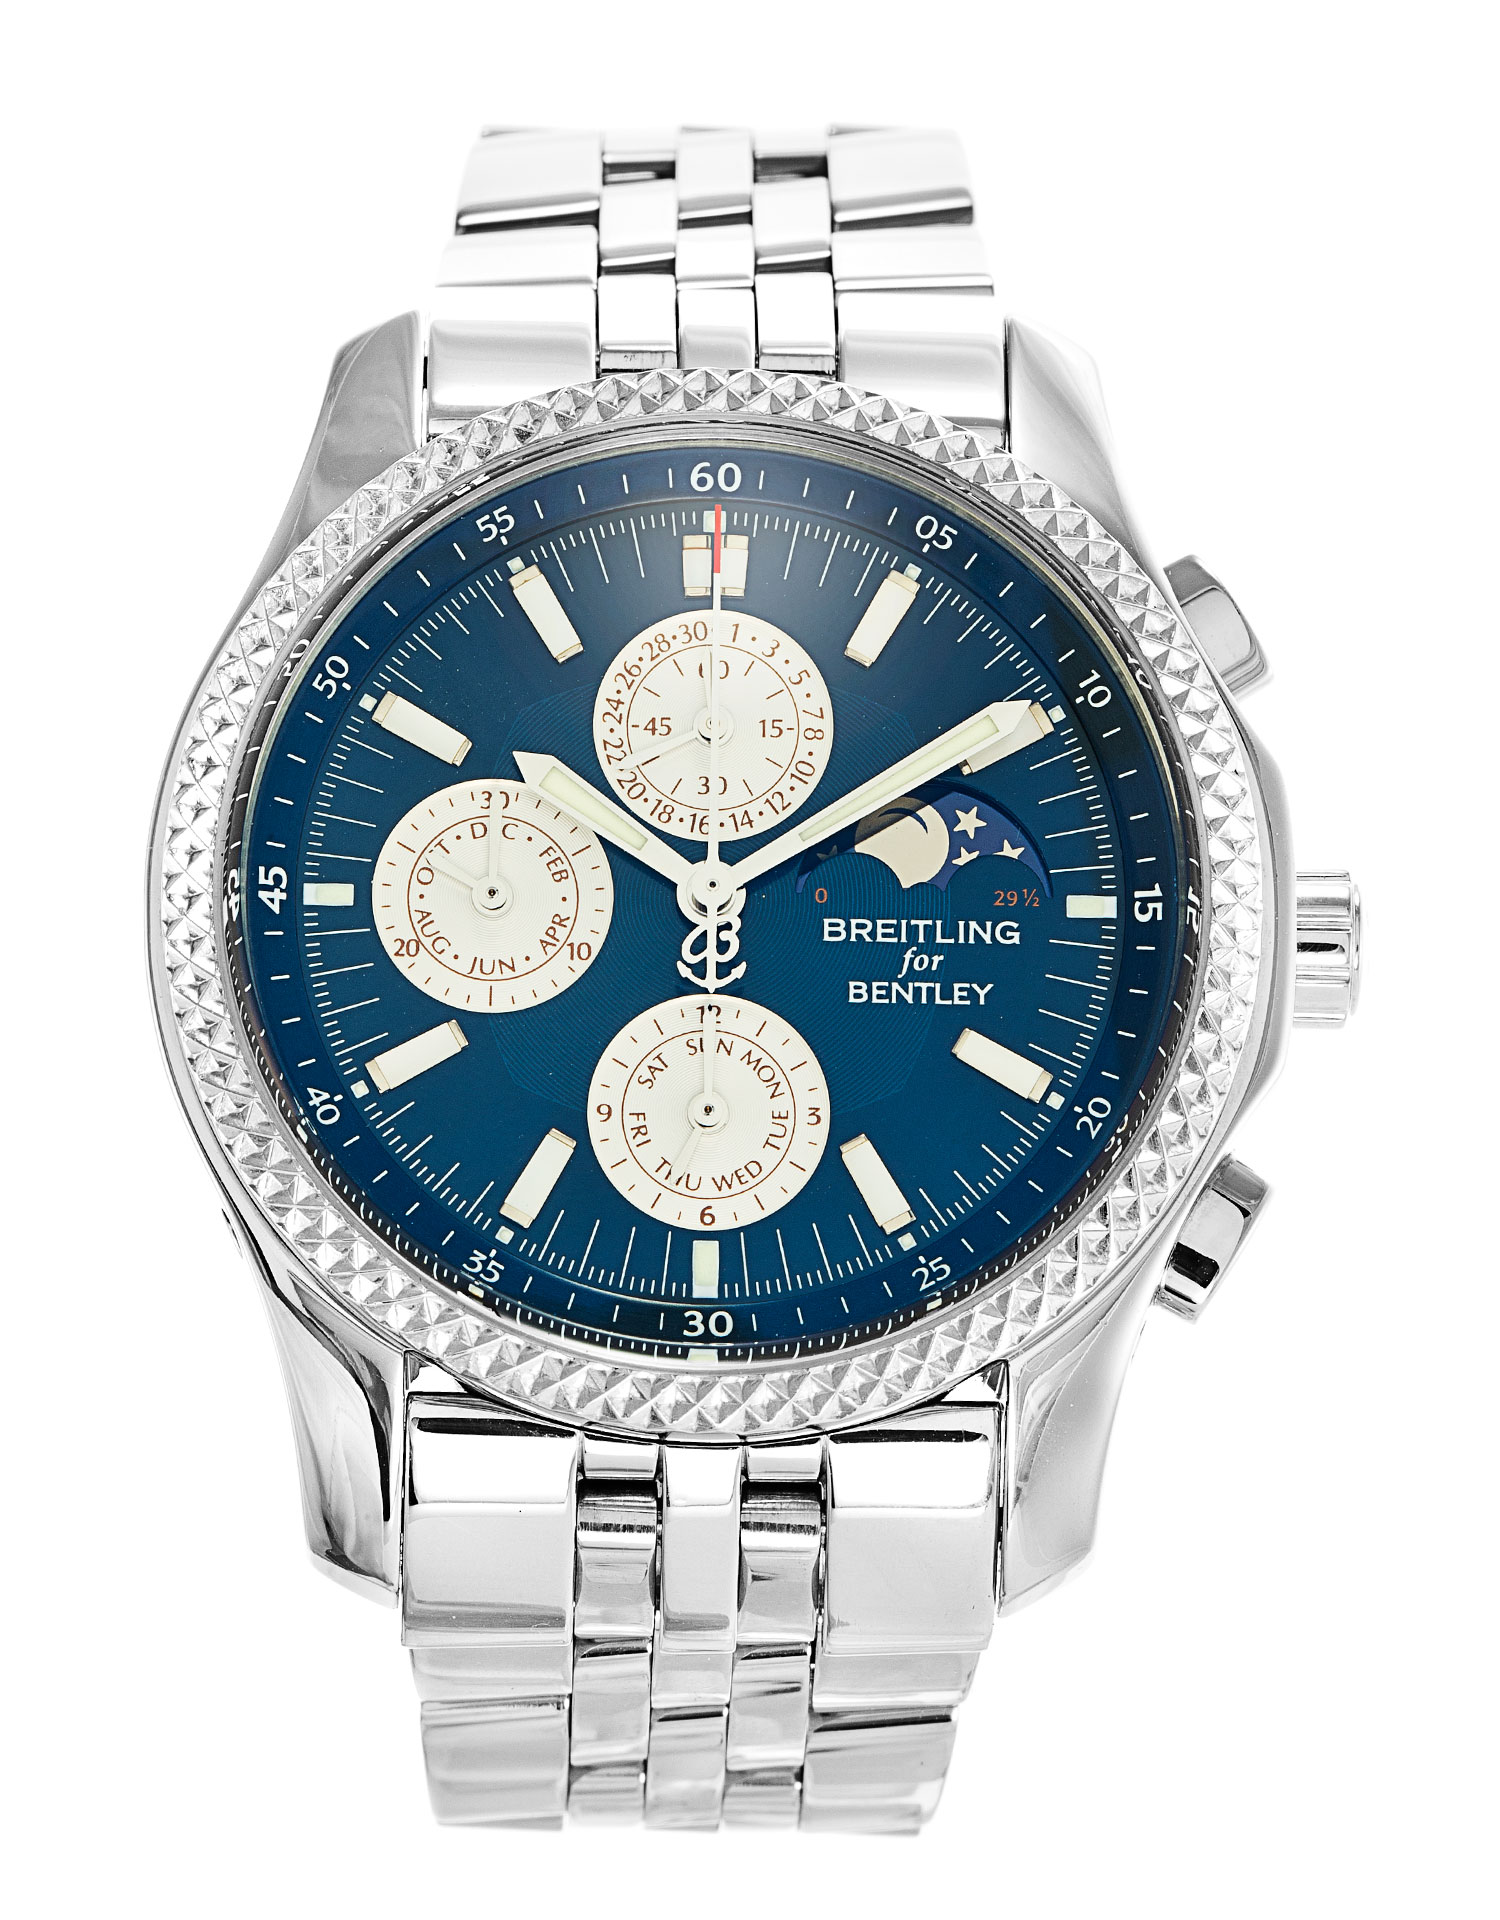 Breitling Bentley Mark VI Complications 19 in Stainless Steel and Platinium